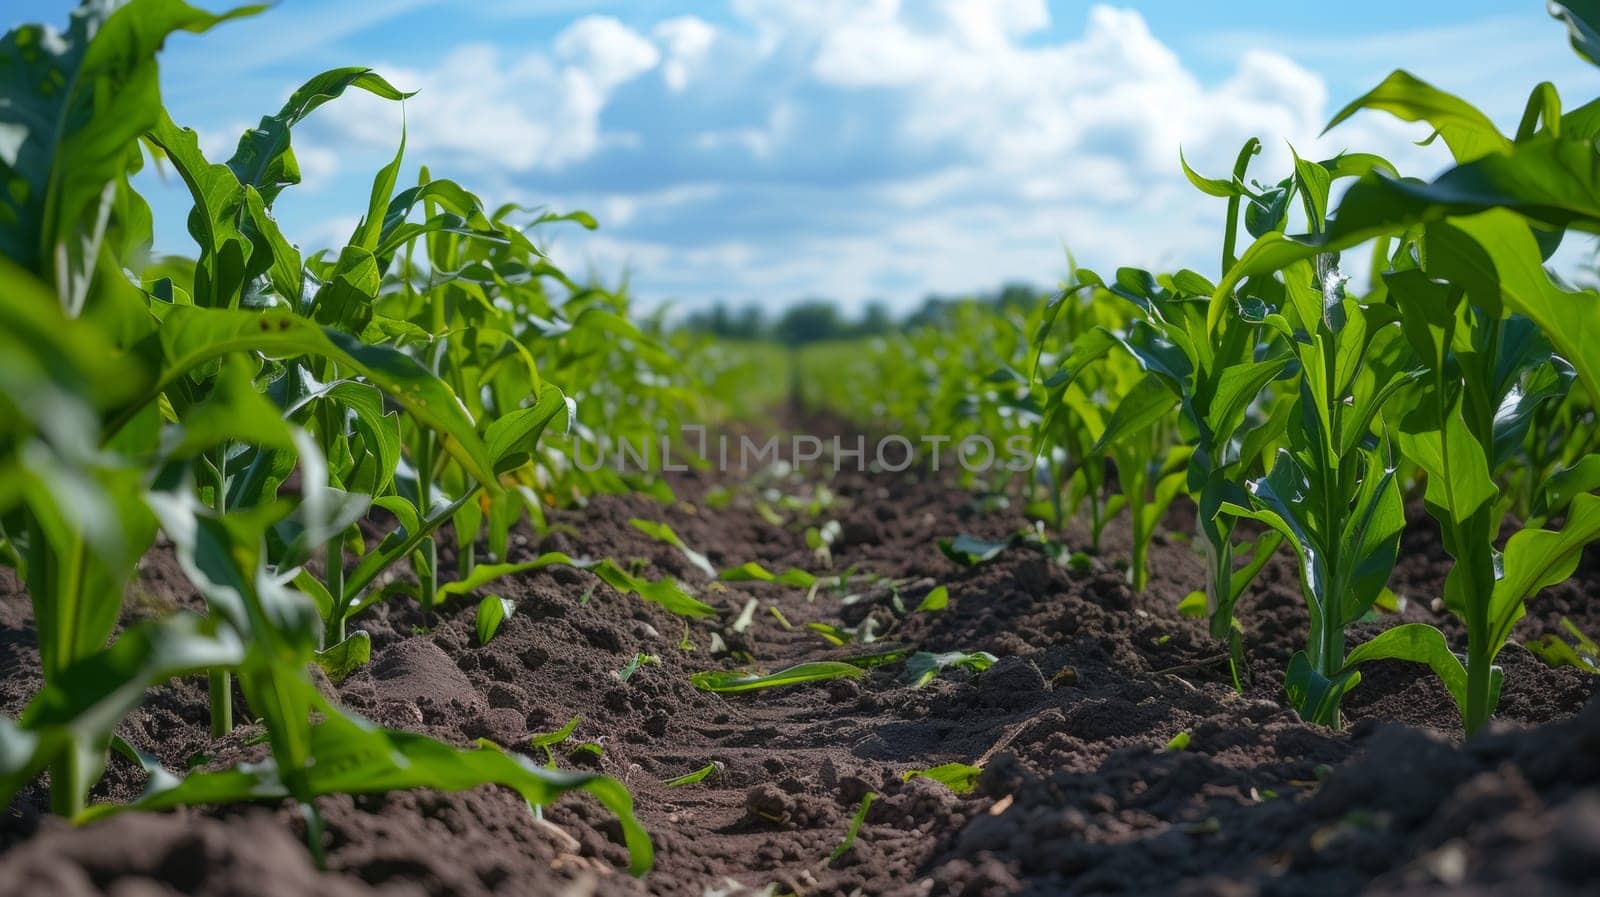 A field of corn plants growing in the dirt with clouds above, AI by starush